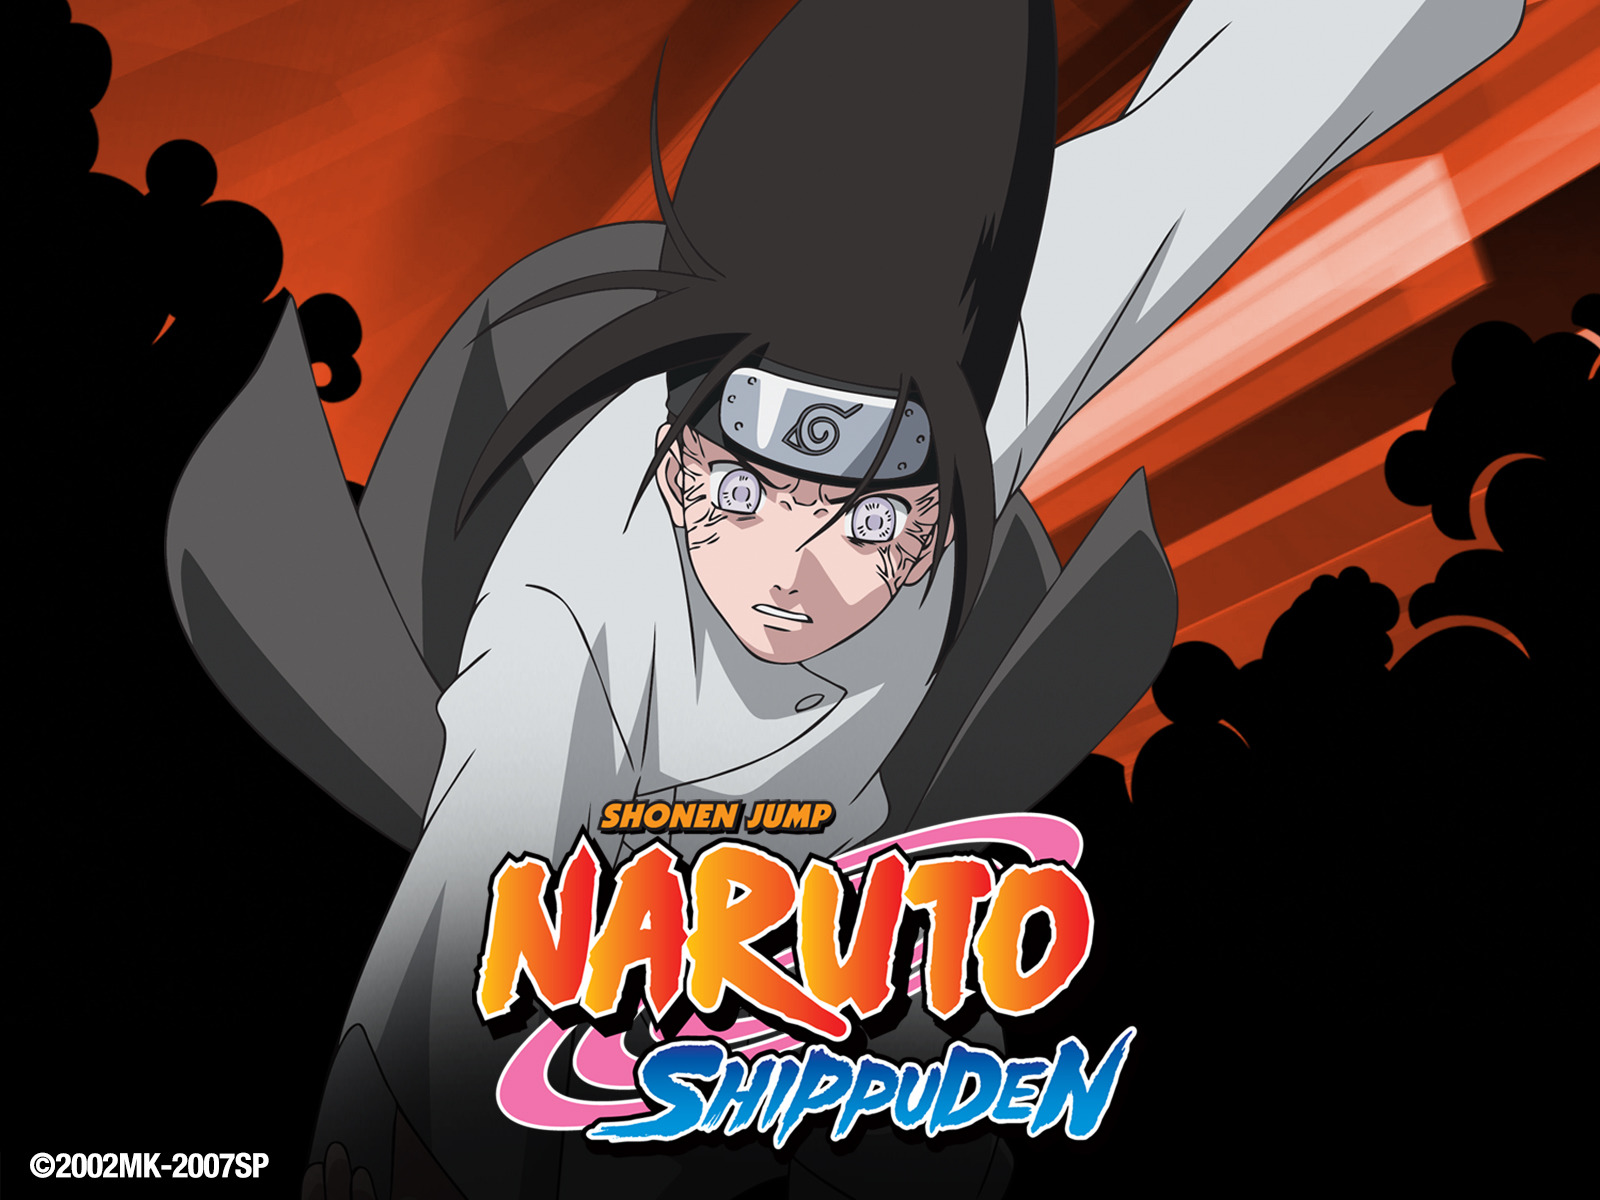 alayna shaw recommends Naruto Shippuden Hd Dubbed